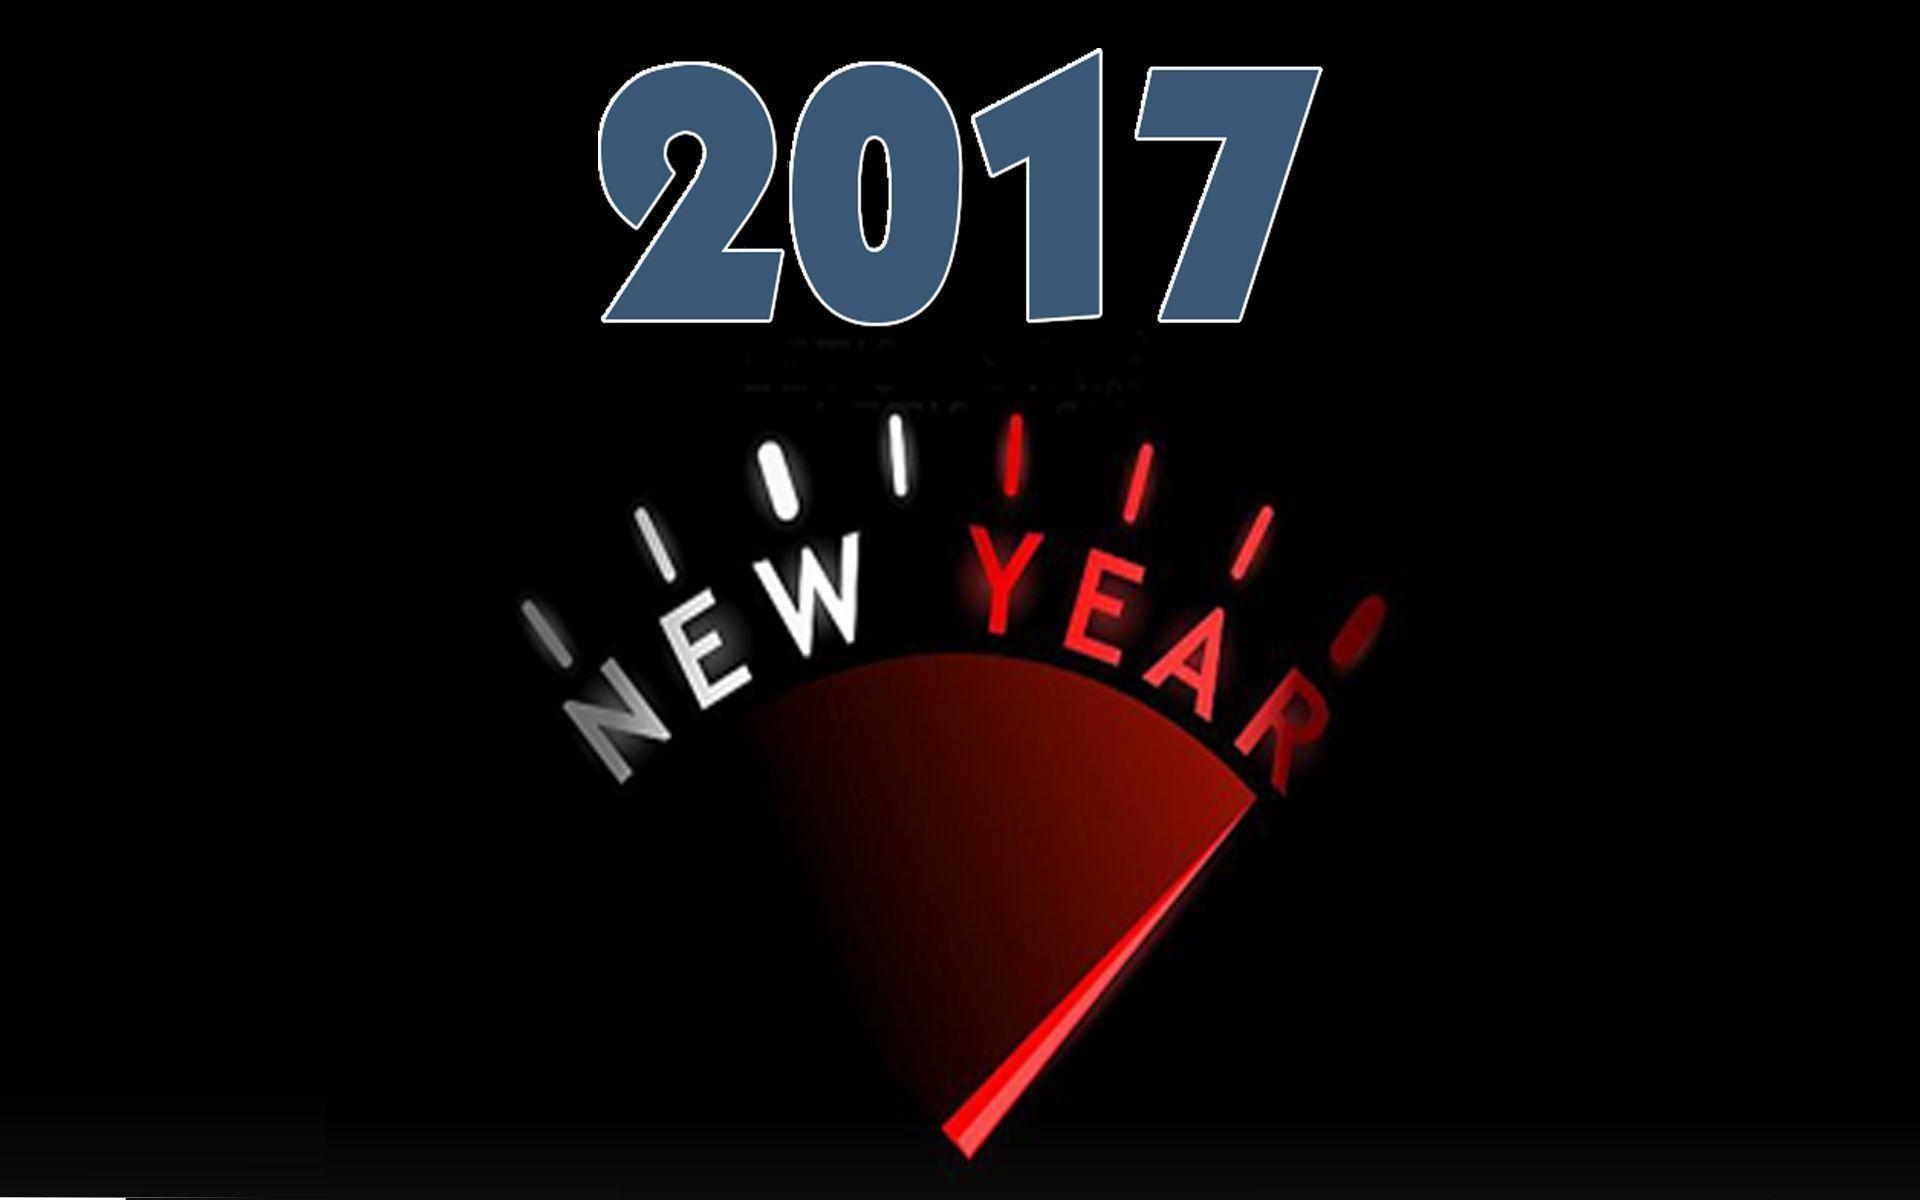 Happy New Year 2017 Wallpaper Image Photo Picture Background